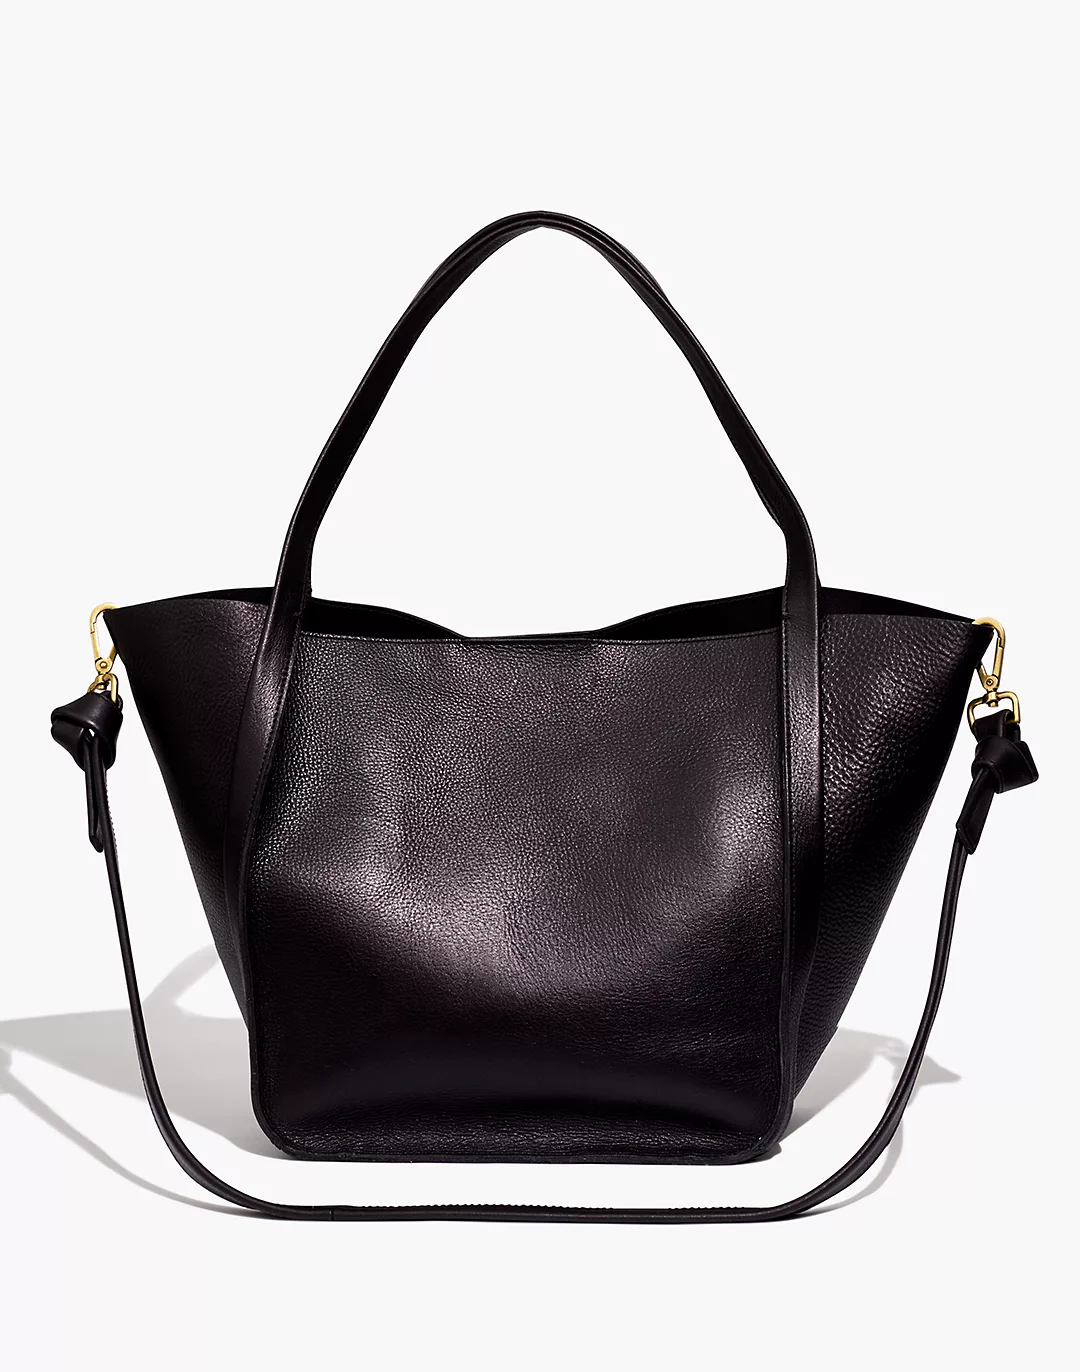 The Sydney Tote